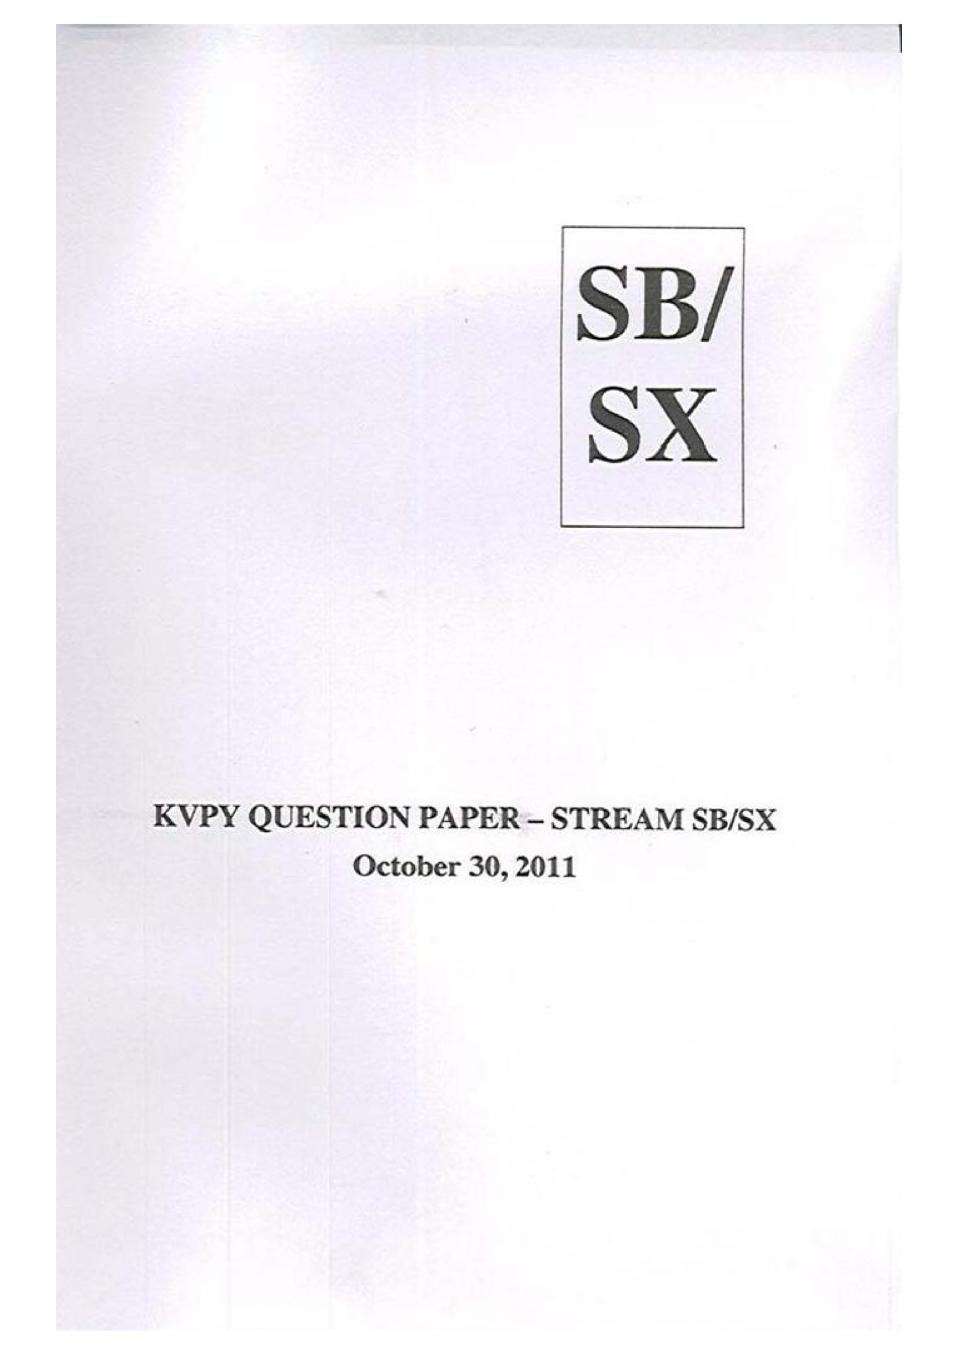 KVPY 2011 Question Paper with Answer Key for SB/SX Stream - Page 1